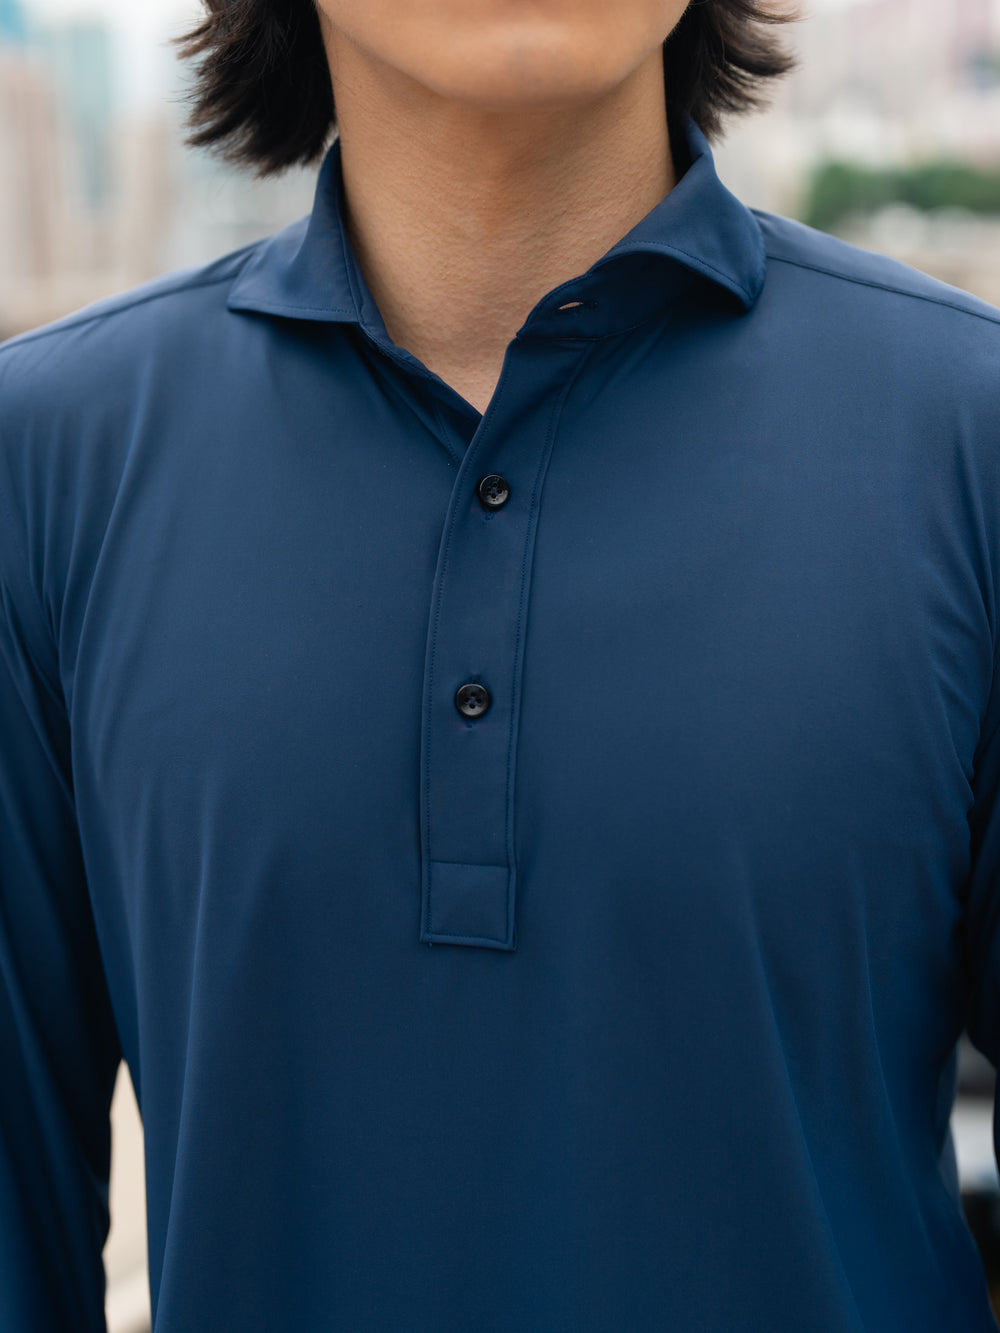 Blue Water Repellent Sailing Polo